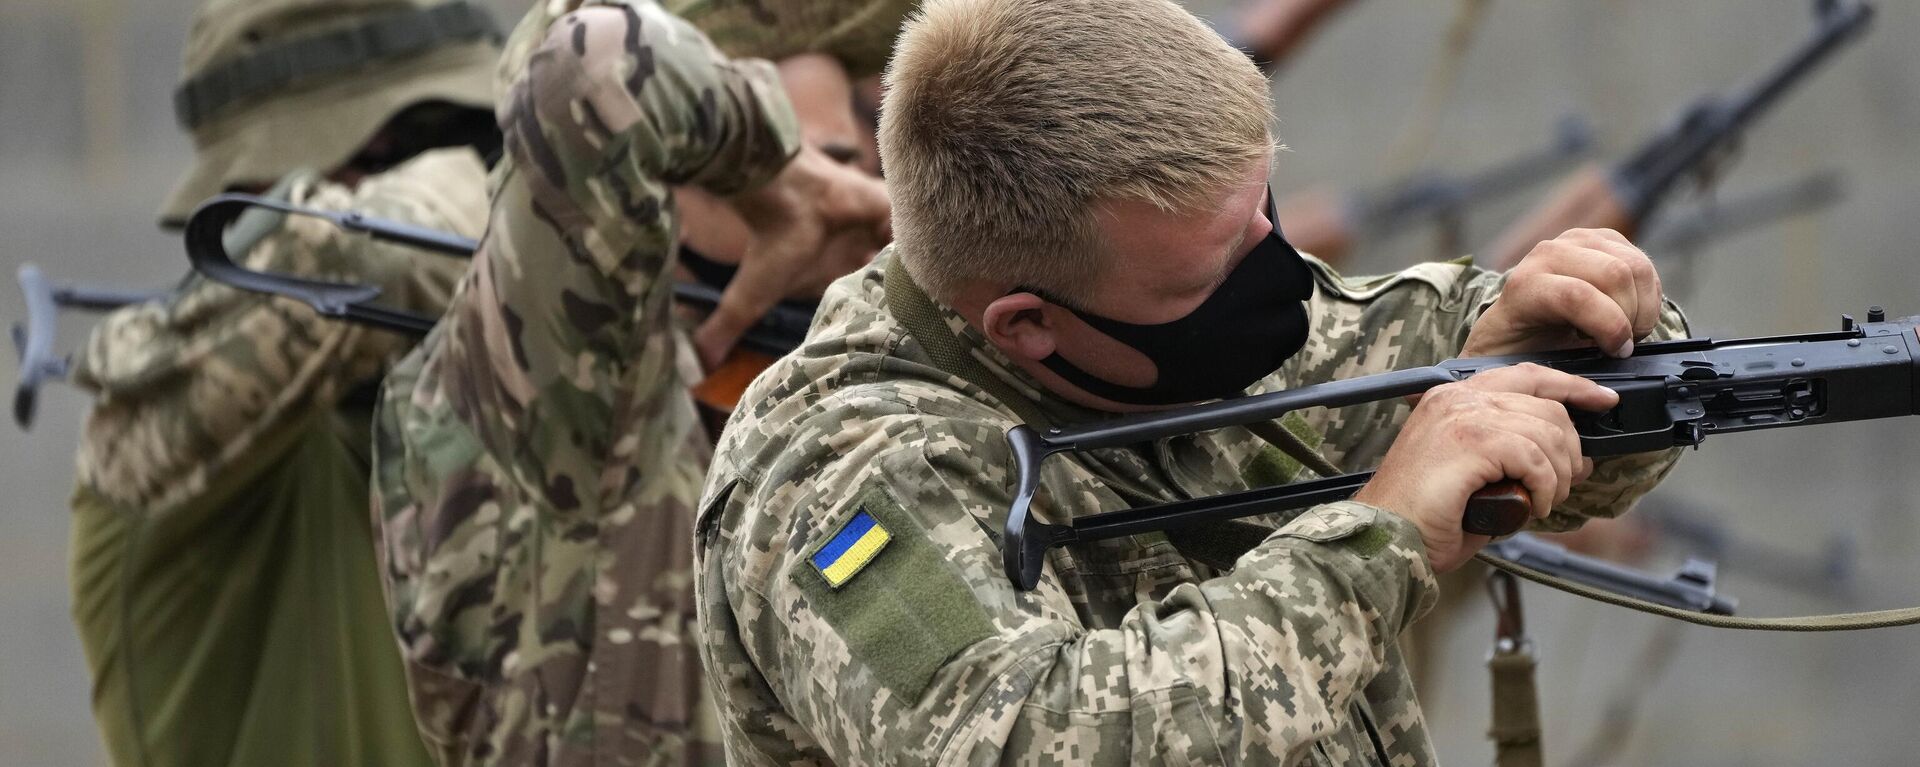 Ukrainian volunteer military recruits take part in an urban battle exercise whilst being trained by British Armed Forces at a military base in Southern England, Monday, Aug. 15, 2022 - Sputnik International, 1920, 01.07.2024